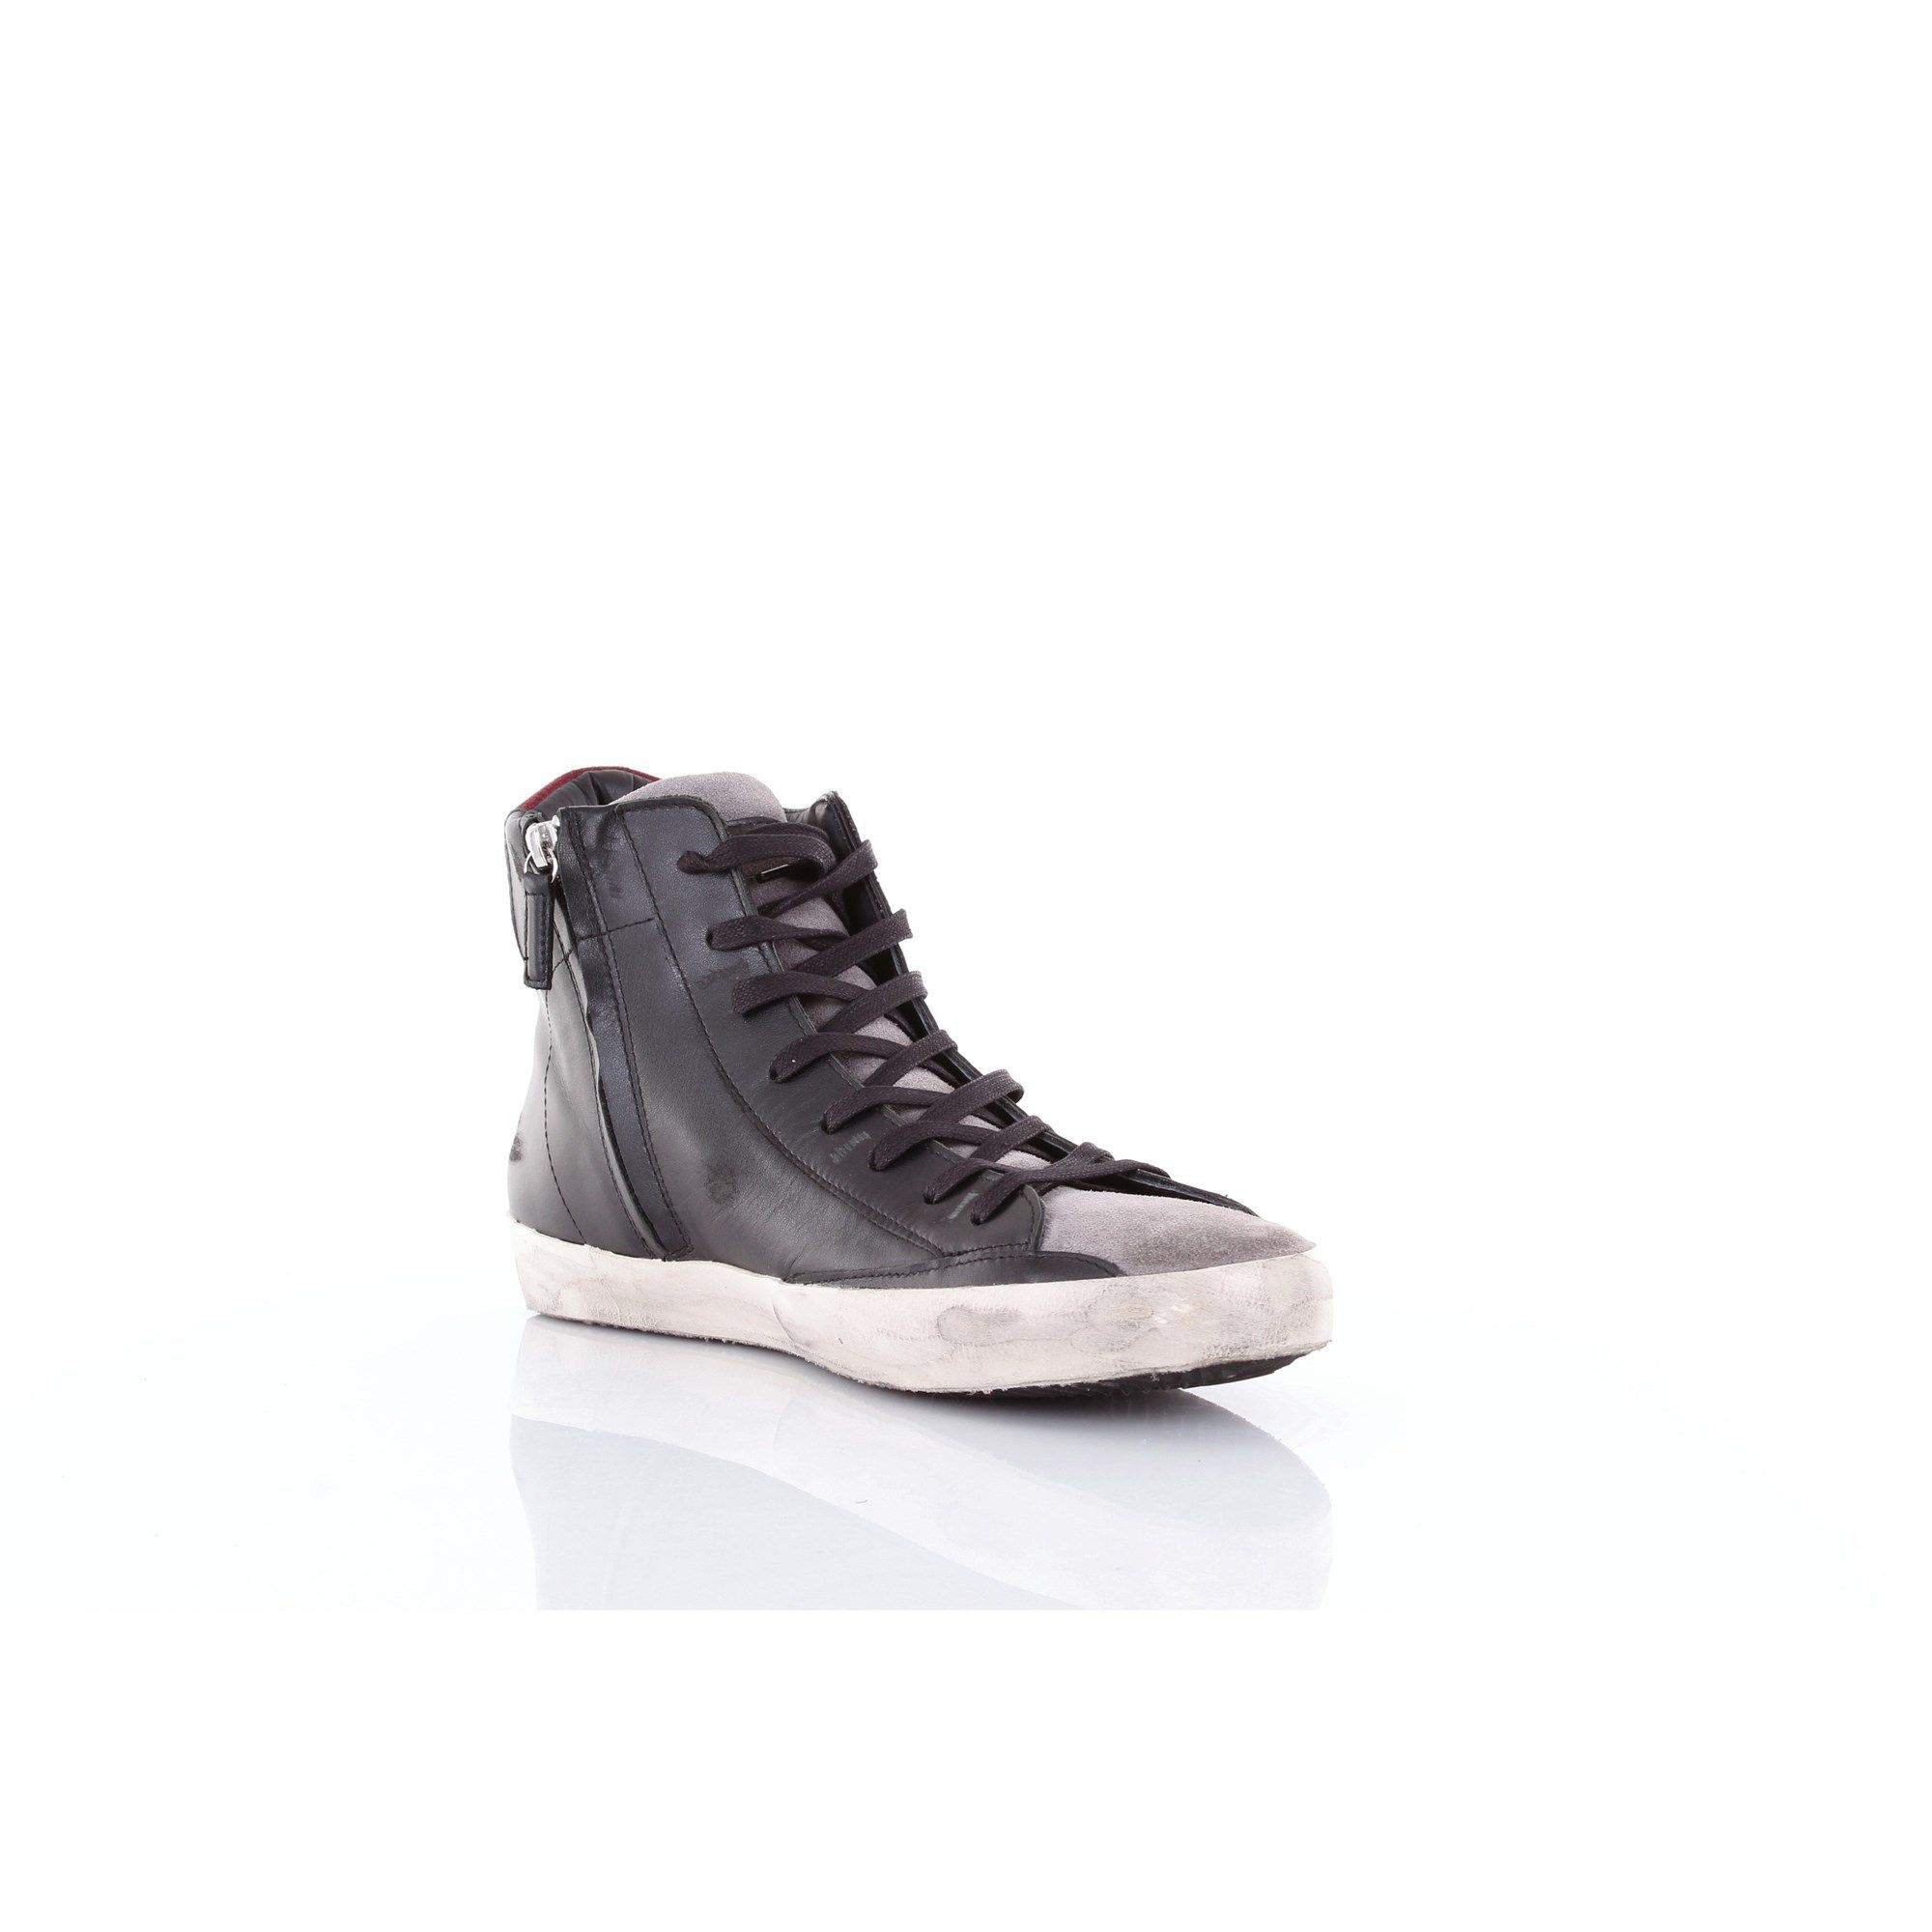 HI TOP SNEAKERS PHILIPPE MODEL, LEATHER 100%, color BLACK, Rubber sole, Outlet, product code CLHUVX36